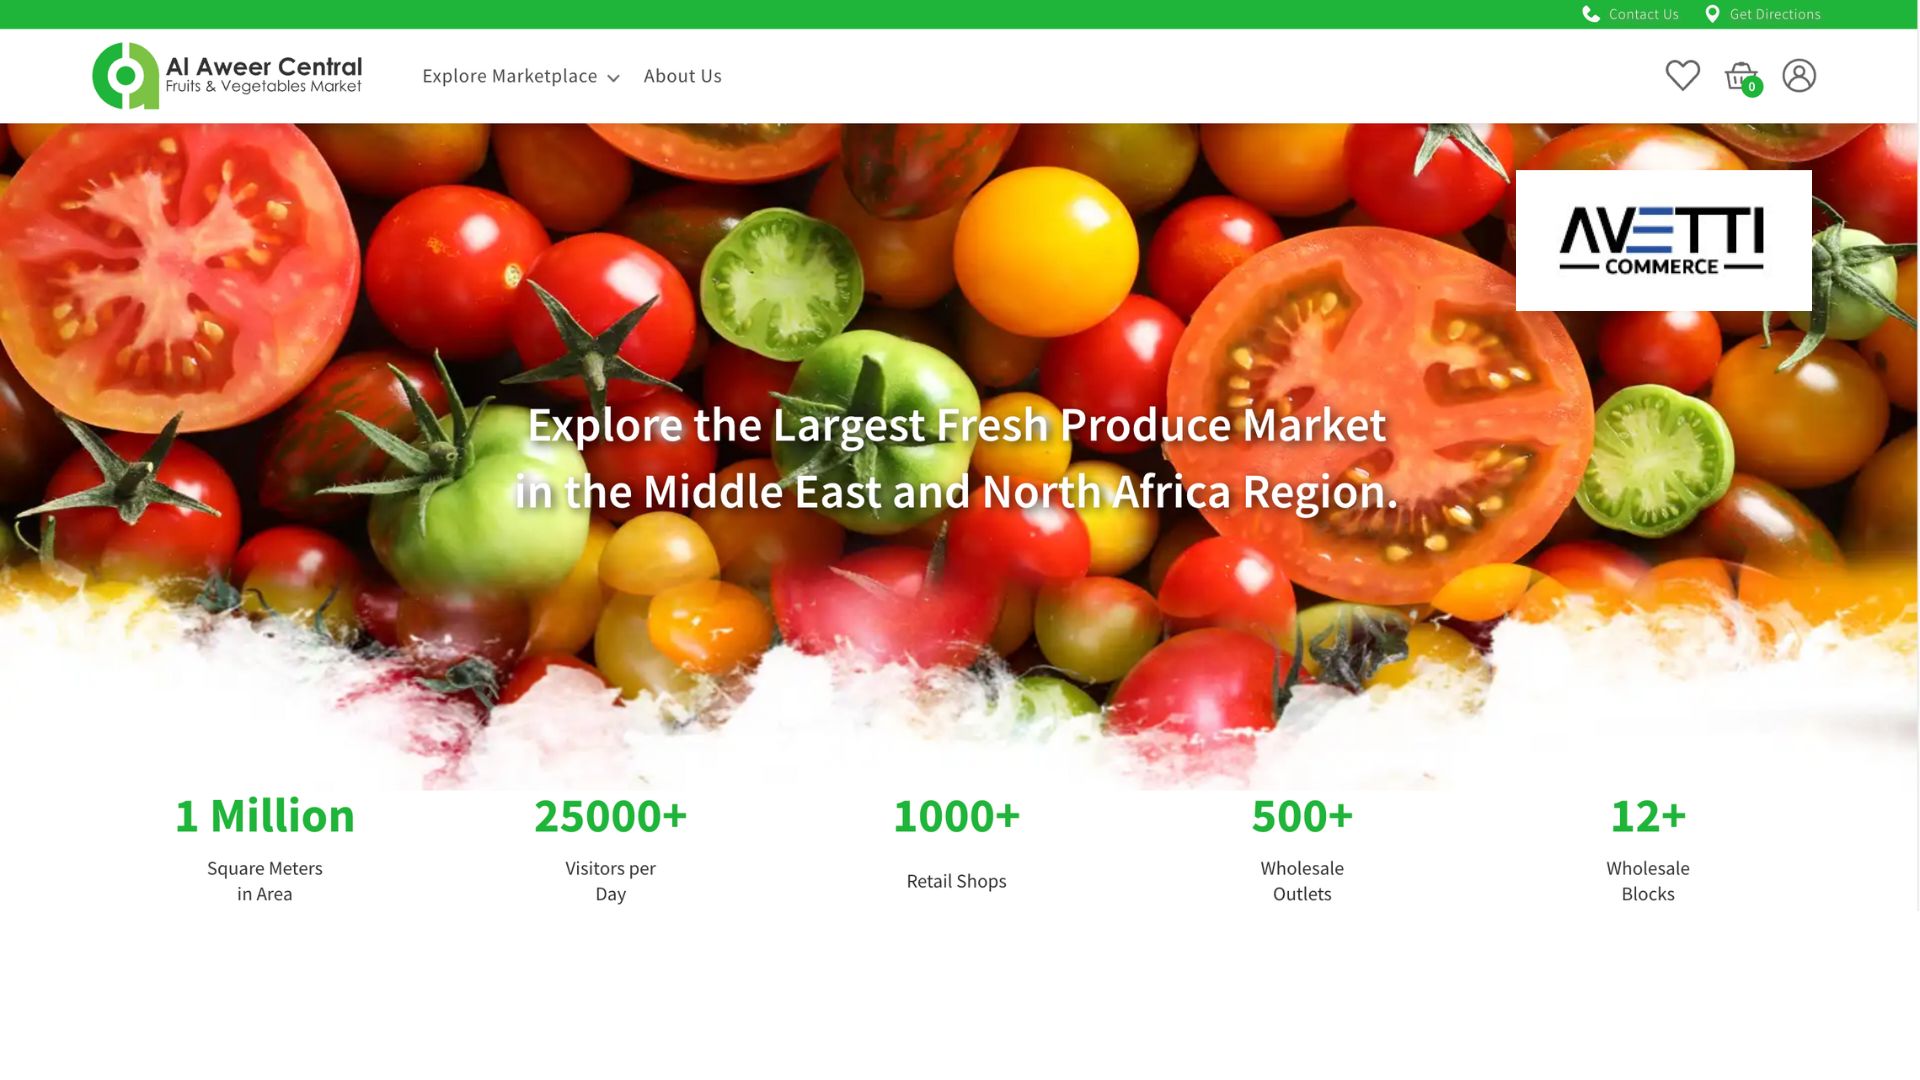 Al Aweer Central's custom food marketplace powered by Avetti Commerce